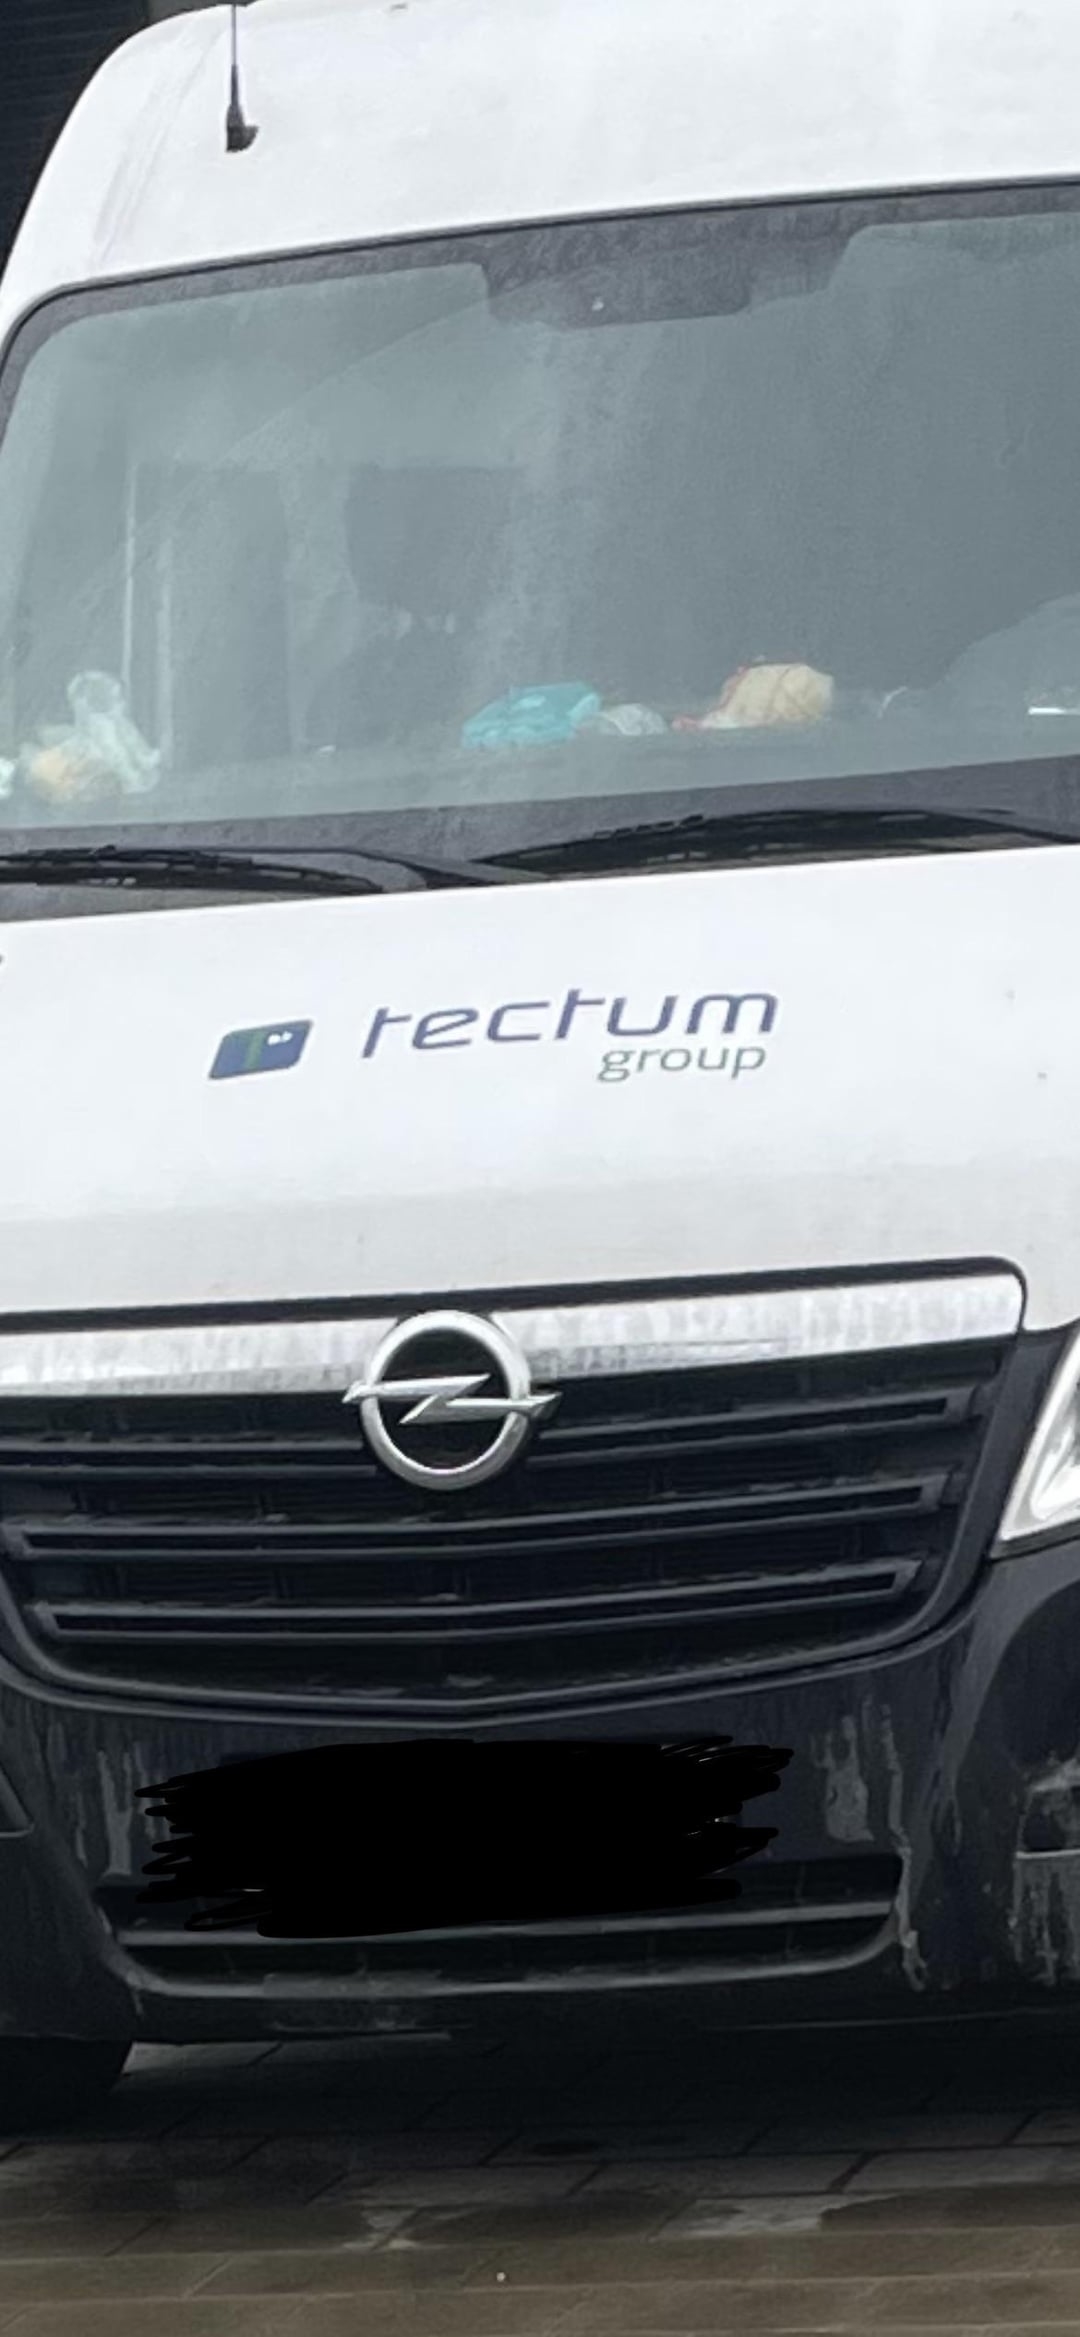 A van with the logo &quot;tectum group&quot; is displayed on the front, but it appears to read &quot;rectum group&quot; because of the oddly shaped t&#x27;s in this font